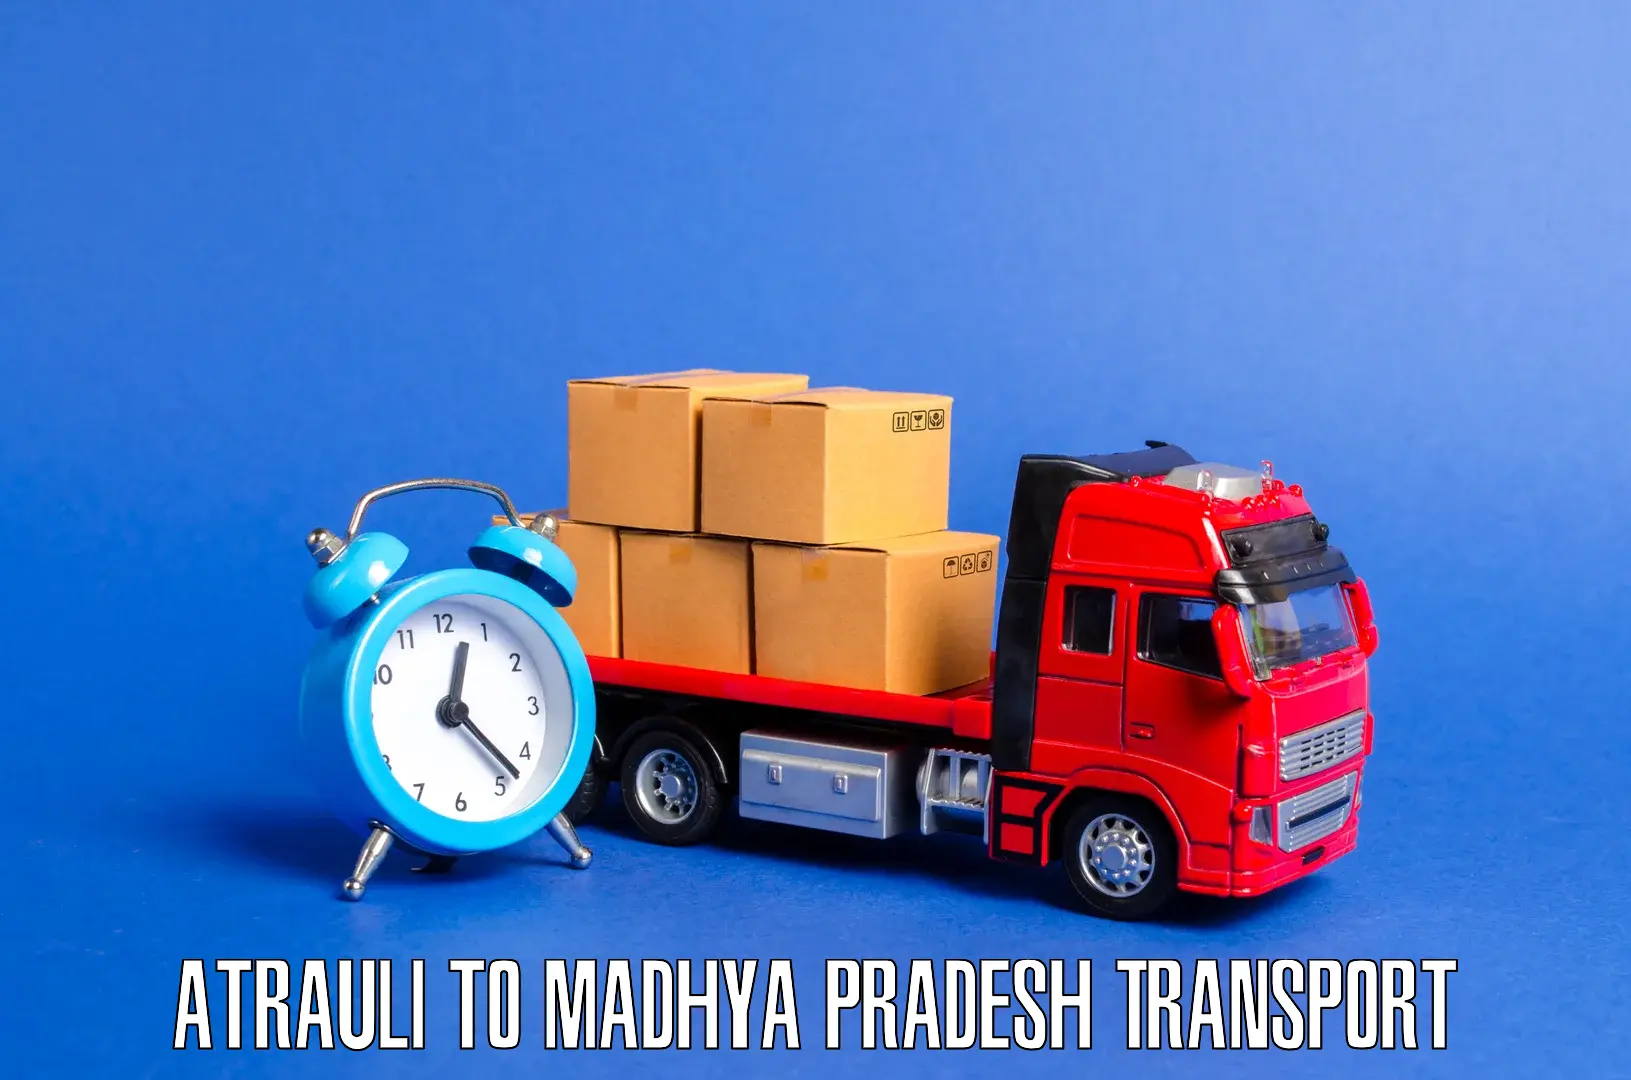 Express transport services in Atrauli to Amarpatan